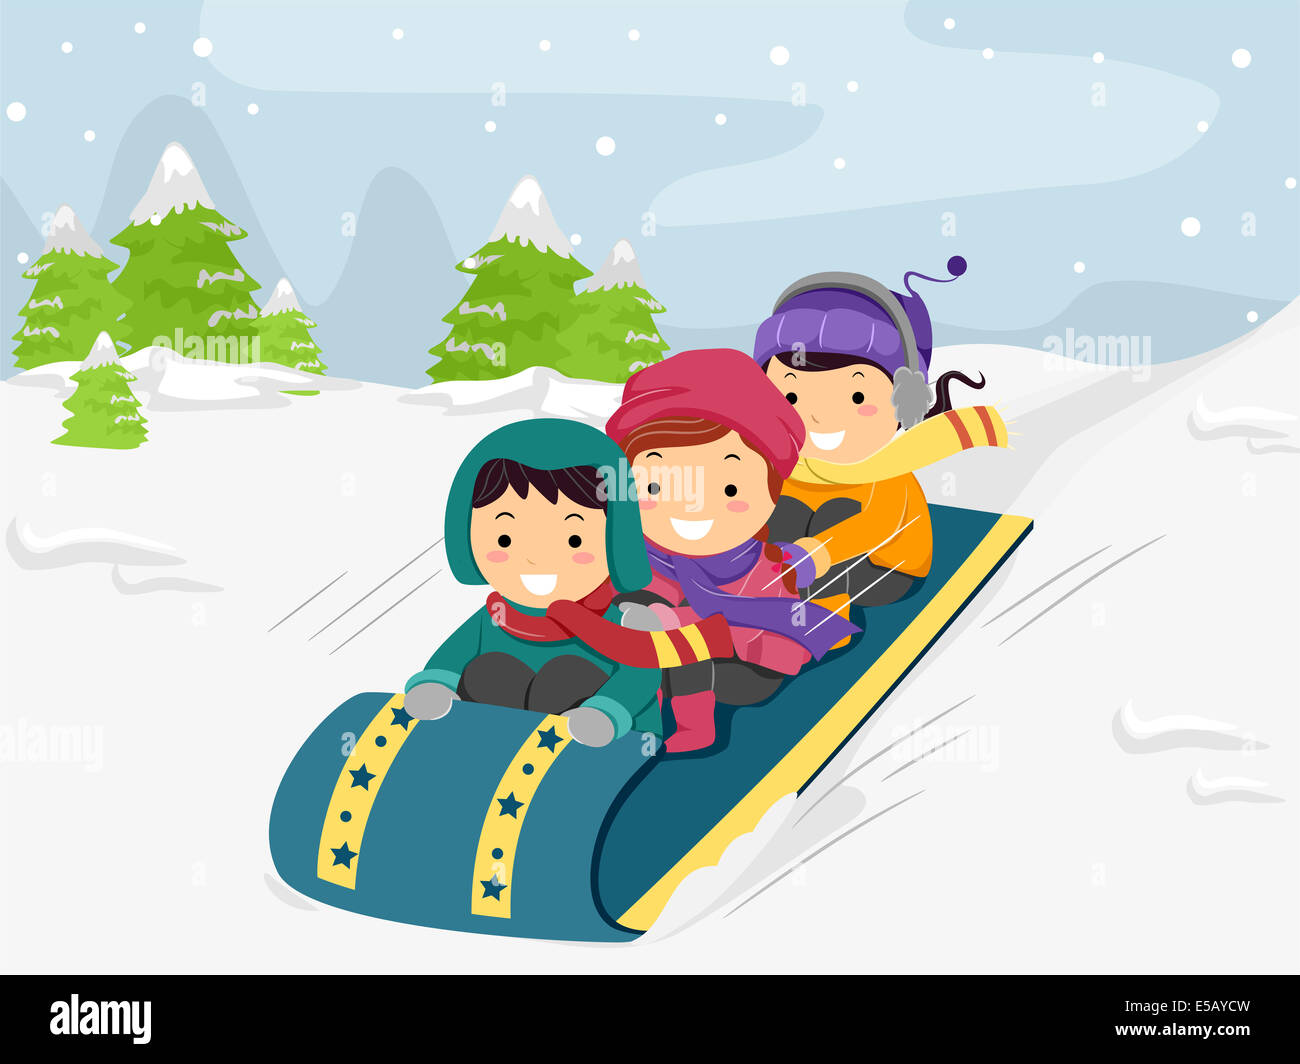 Illustration of Kids Riding on a Snow Sled Stock Photo